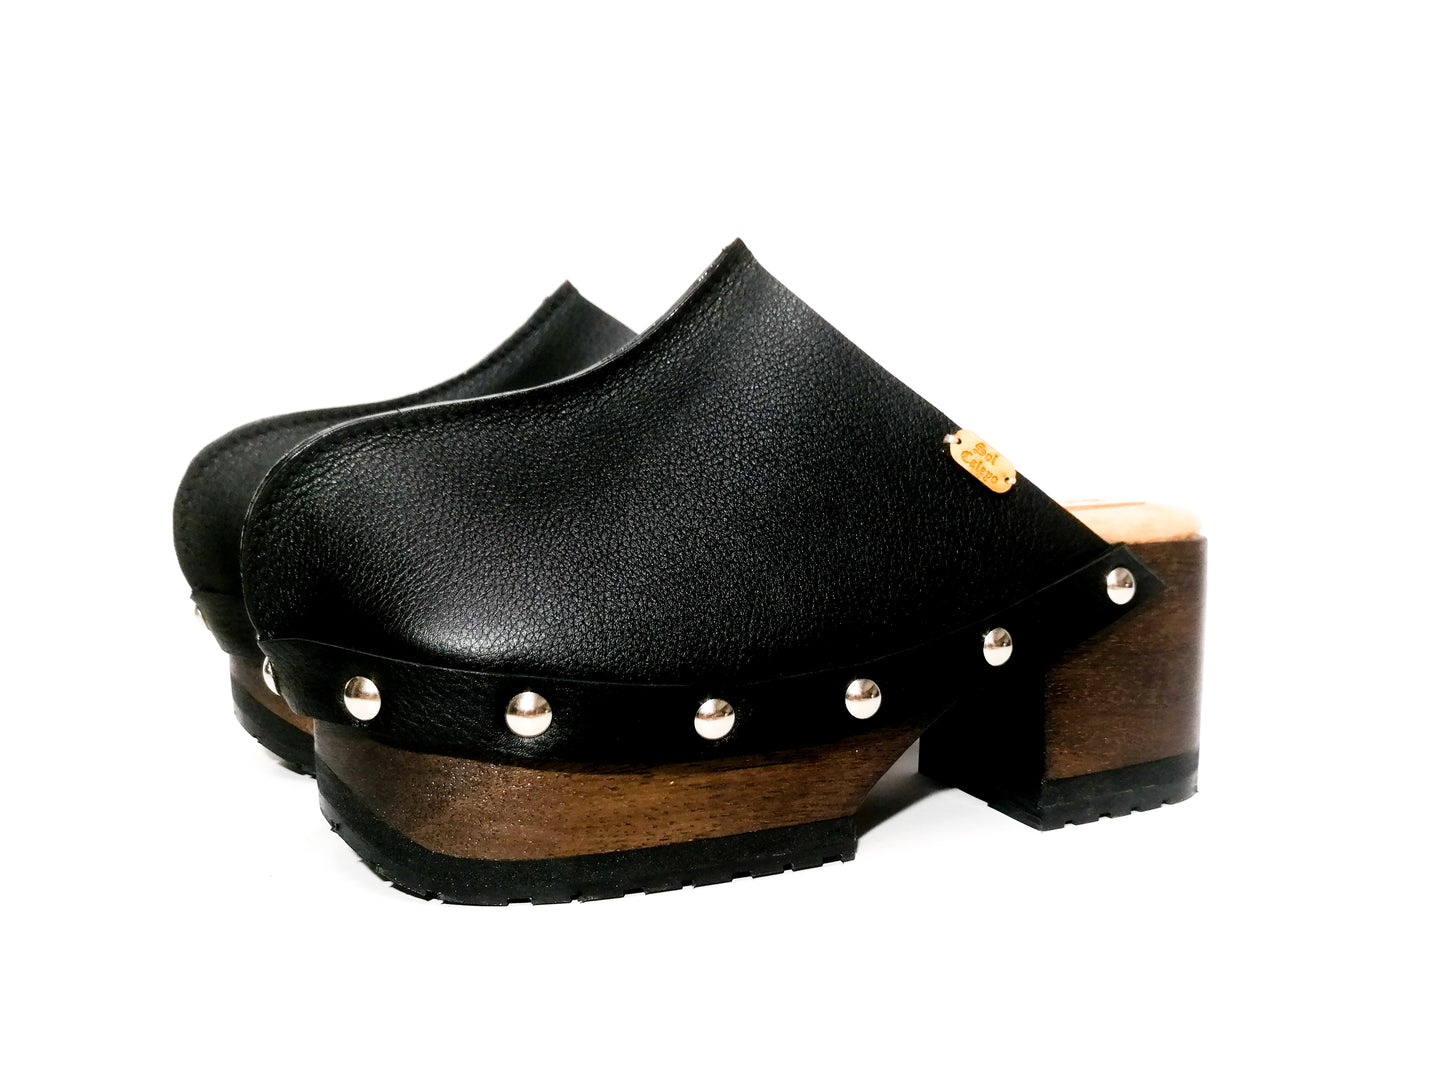 Black leather clogs. Classic vintage style leather clogs. Black clog with wooden heel. Sizes 34 to 47. High quality handmade leather shoes by sol Caleyo. Sustainable fashion.